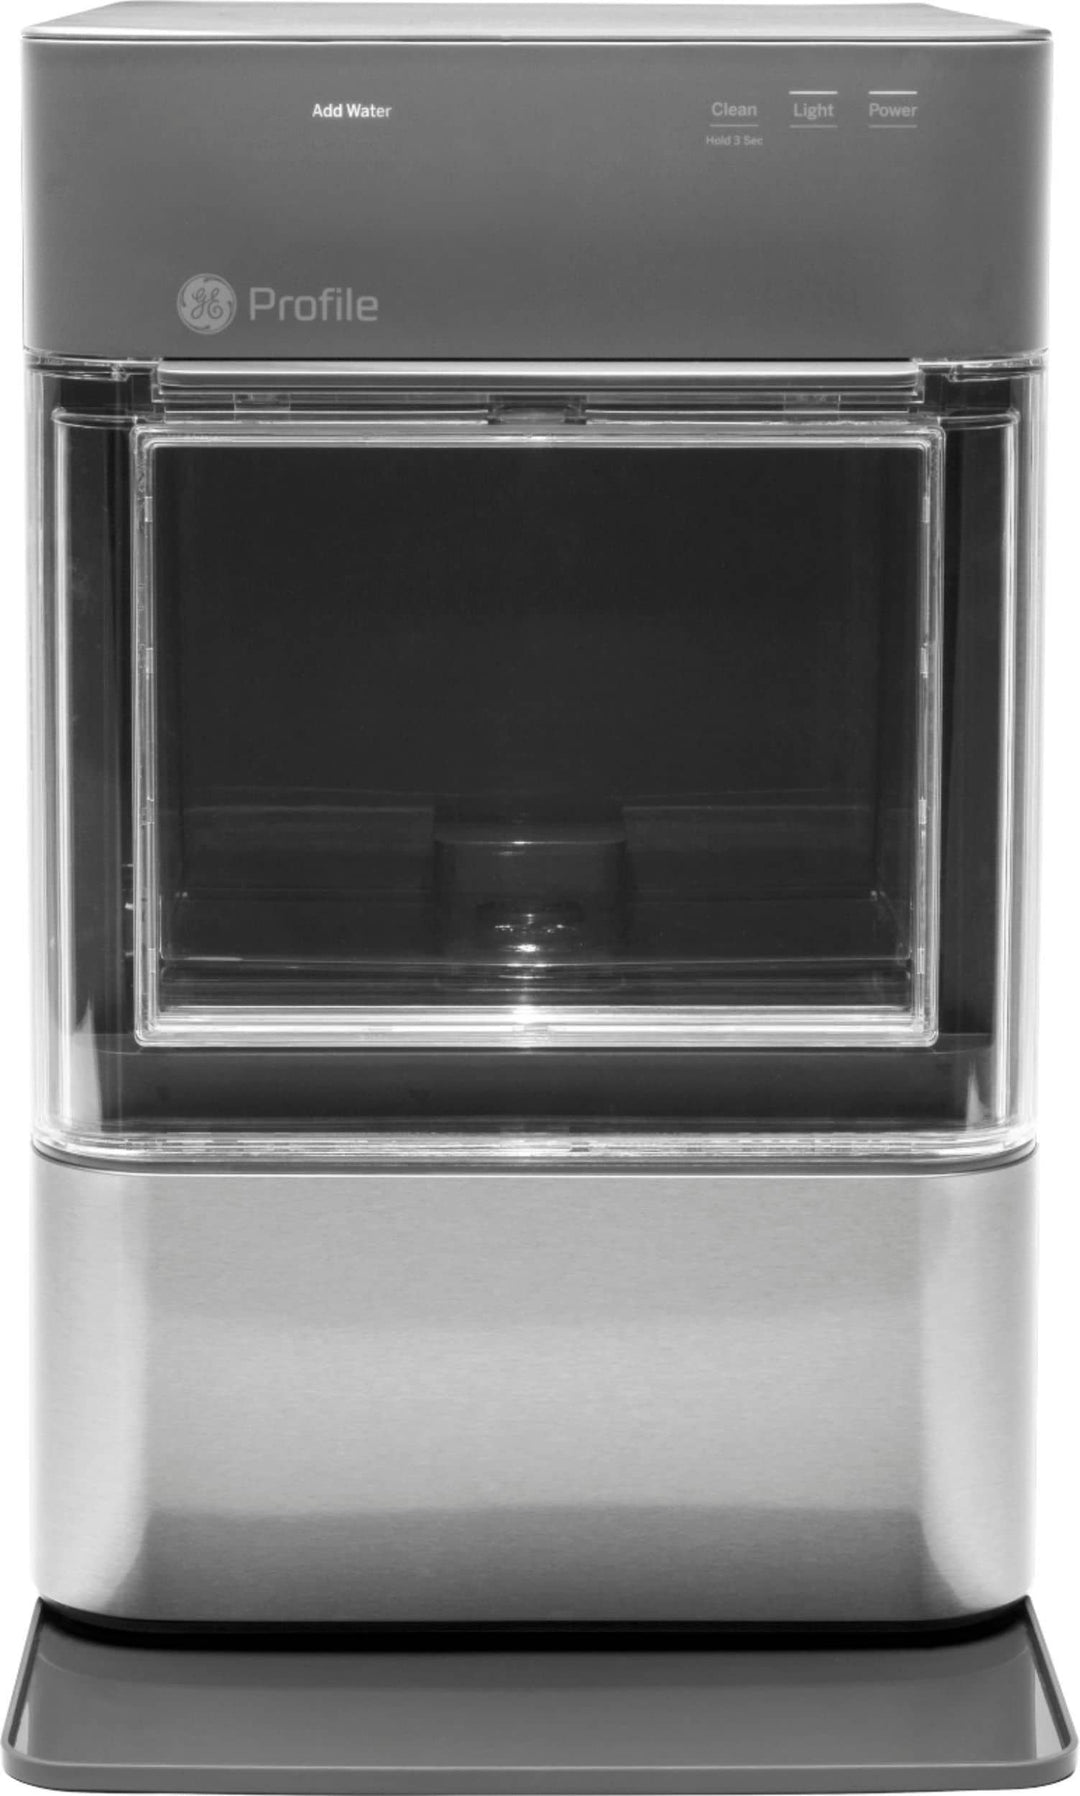 GE Profile - Opal 2.0 24 lb. Portable Ice maker with Nugget Ice Production and Built-In WiFi - Stainless steel_5